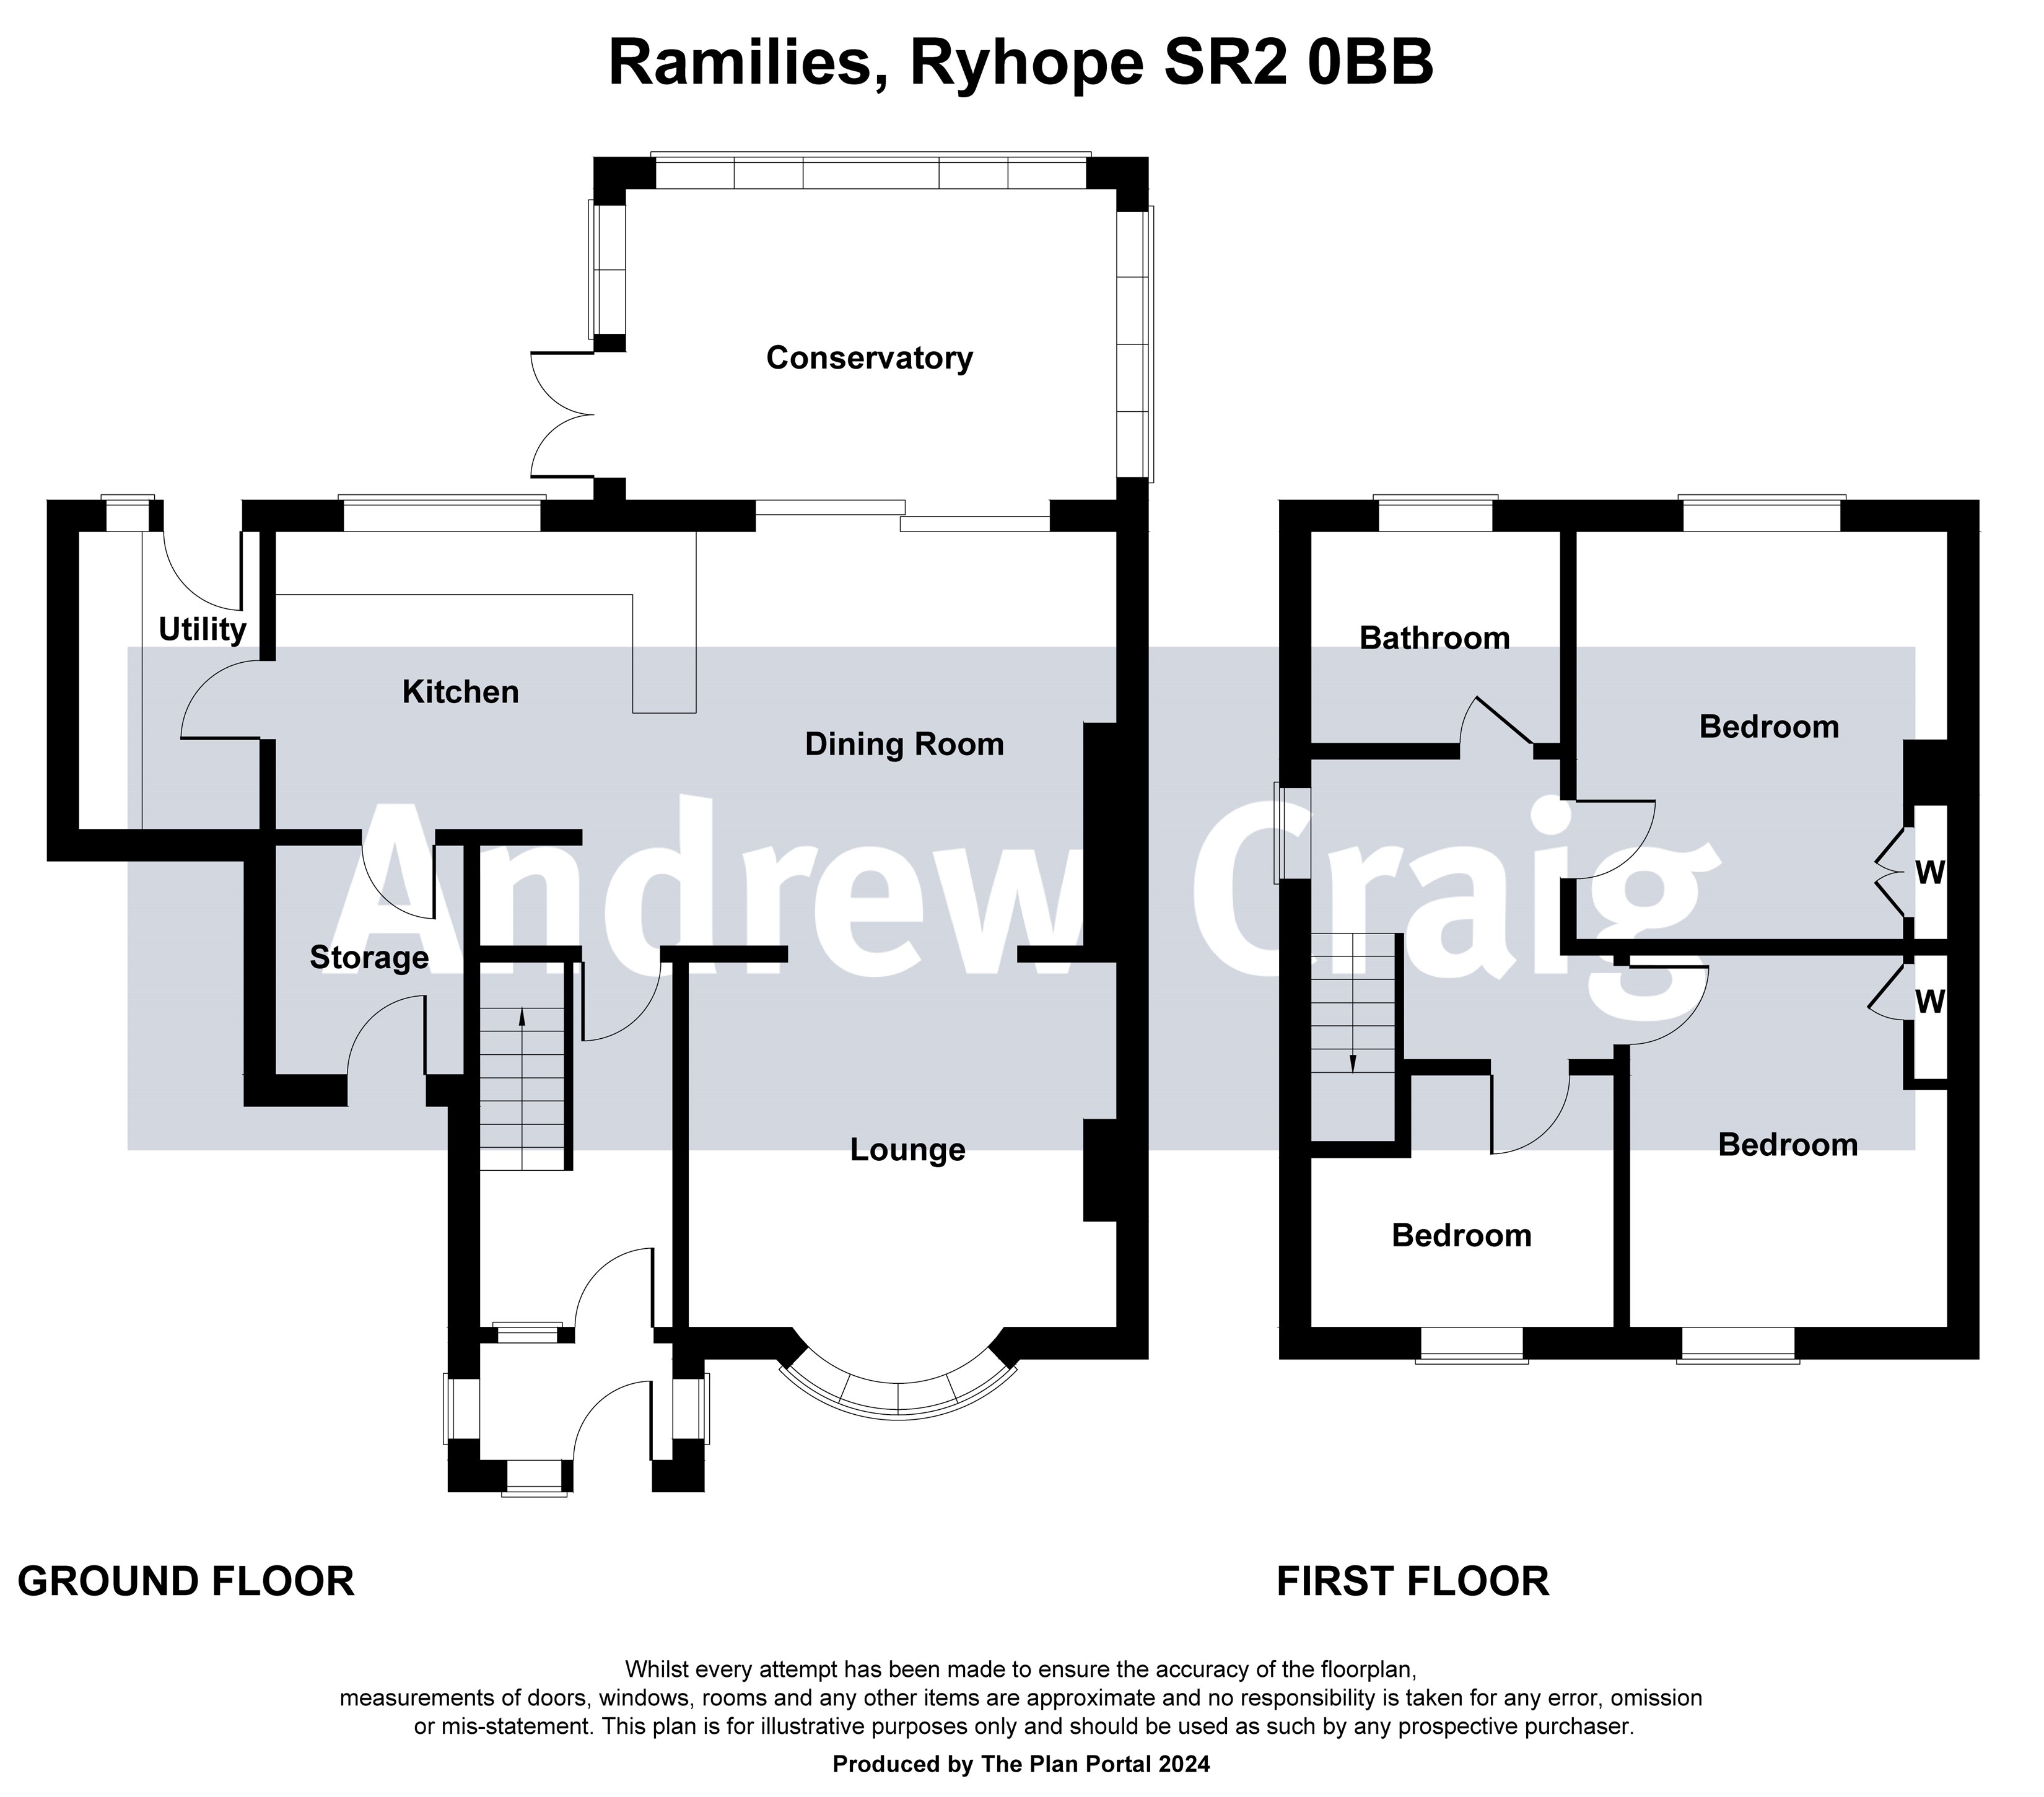 3 bed semi-detached house for sale in Ramilies, Ryhope - Property floorplan